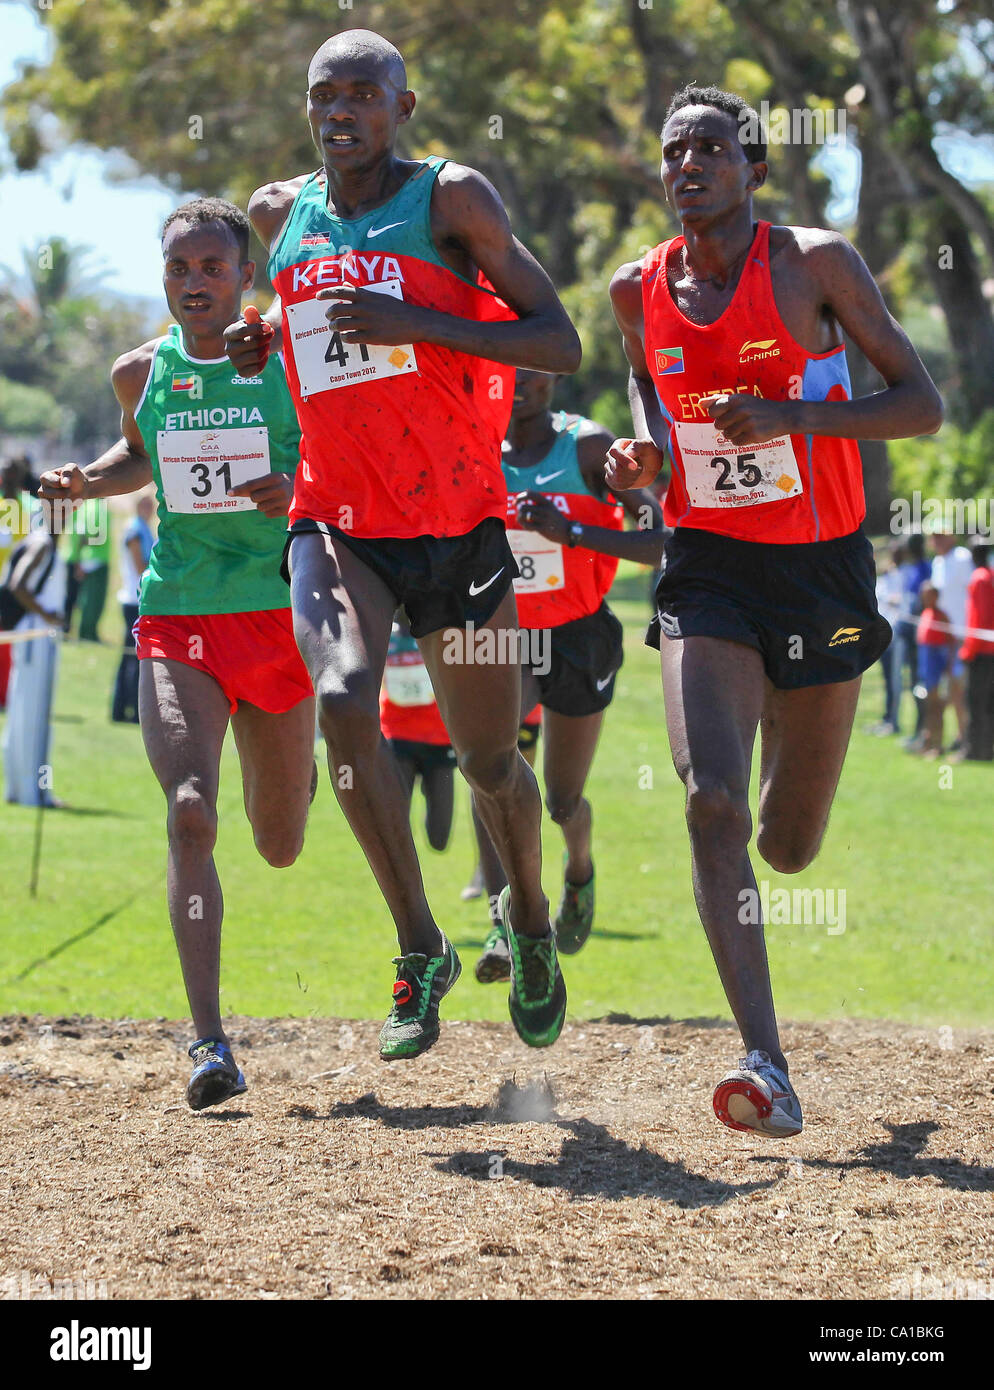 CAPE TOWN, SOUTH AFRICA, Sunday 18 March 2012,Clement Kiprono Langat of Kenya (41) and Teklemariam Medhin of Eritrea (25) in the senior mens 12km race during the African Cross Country Championships held at Keurboom Park, Rondebosch and hosted by Athletics South Africa and the Confederation of Africa Stock Photo